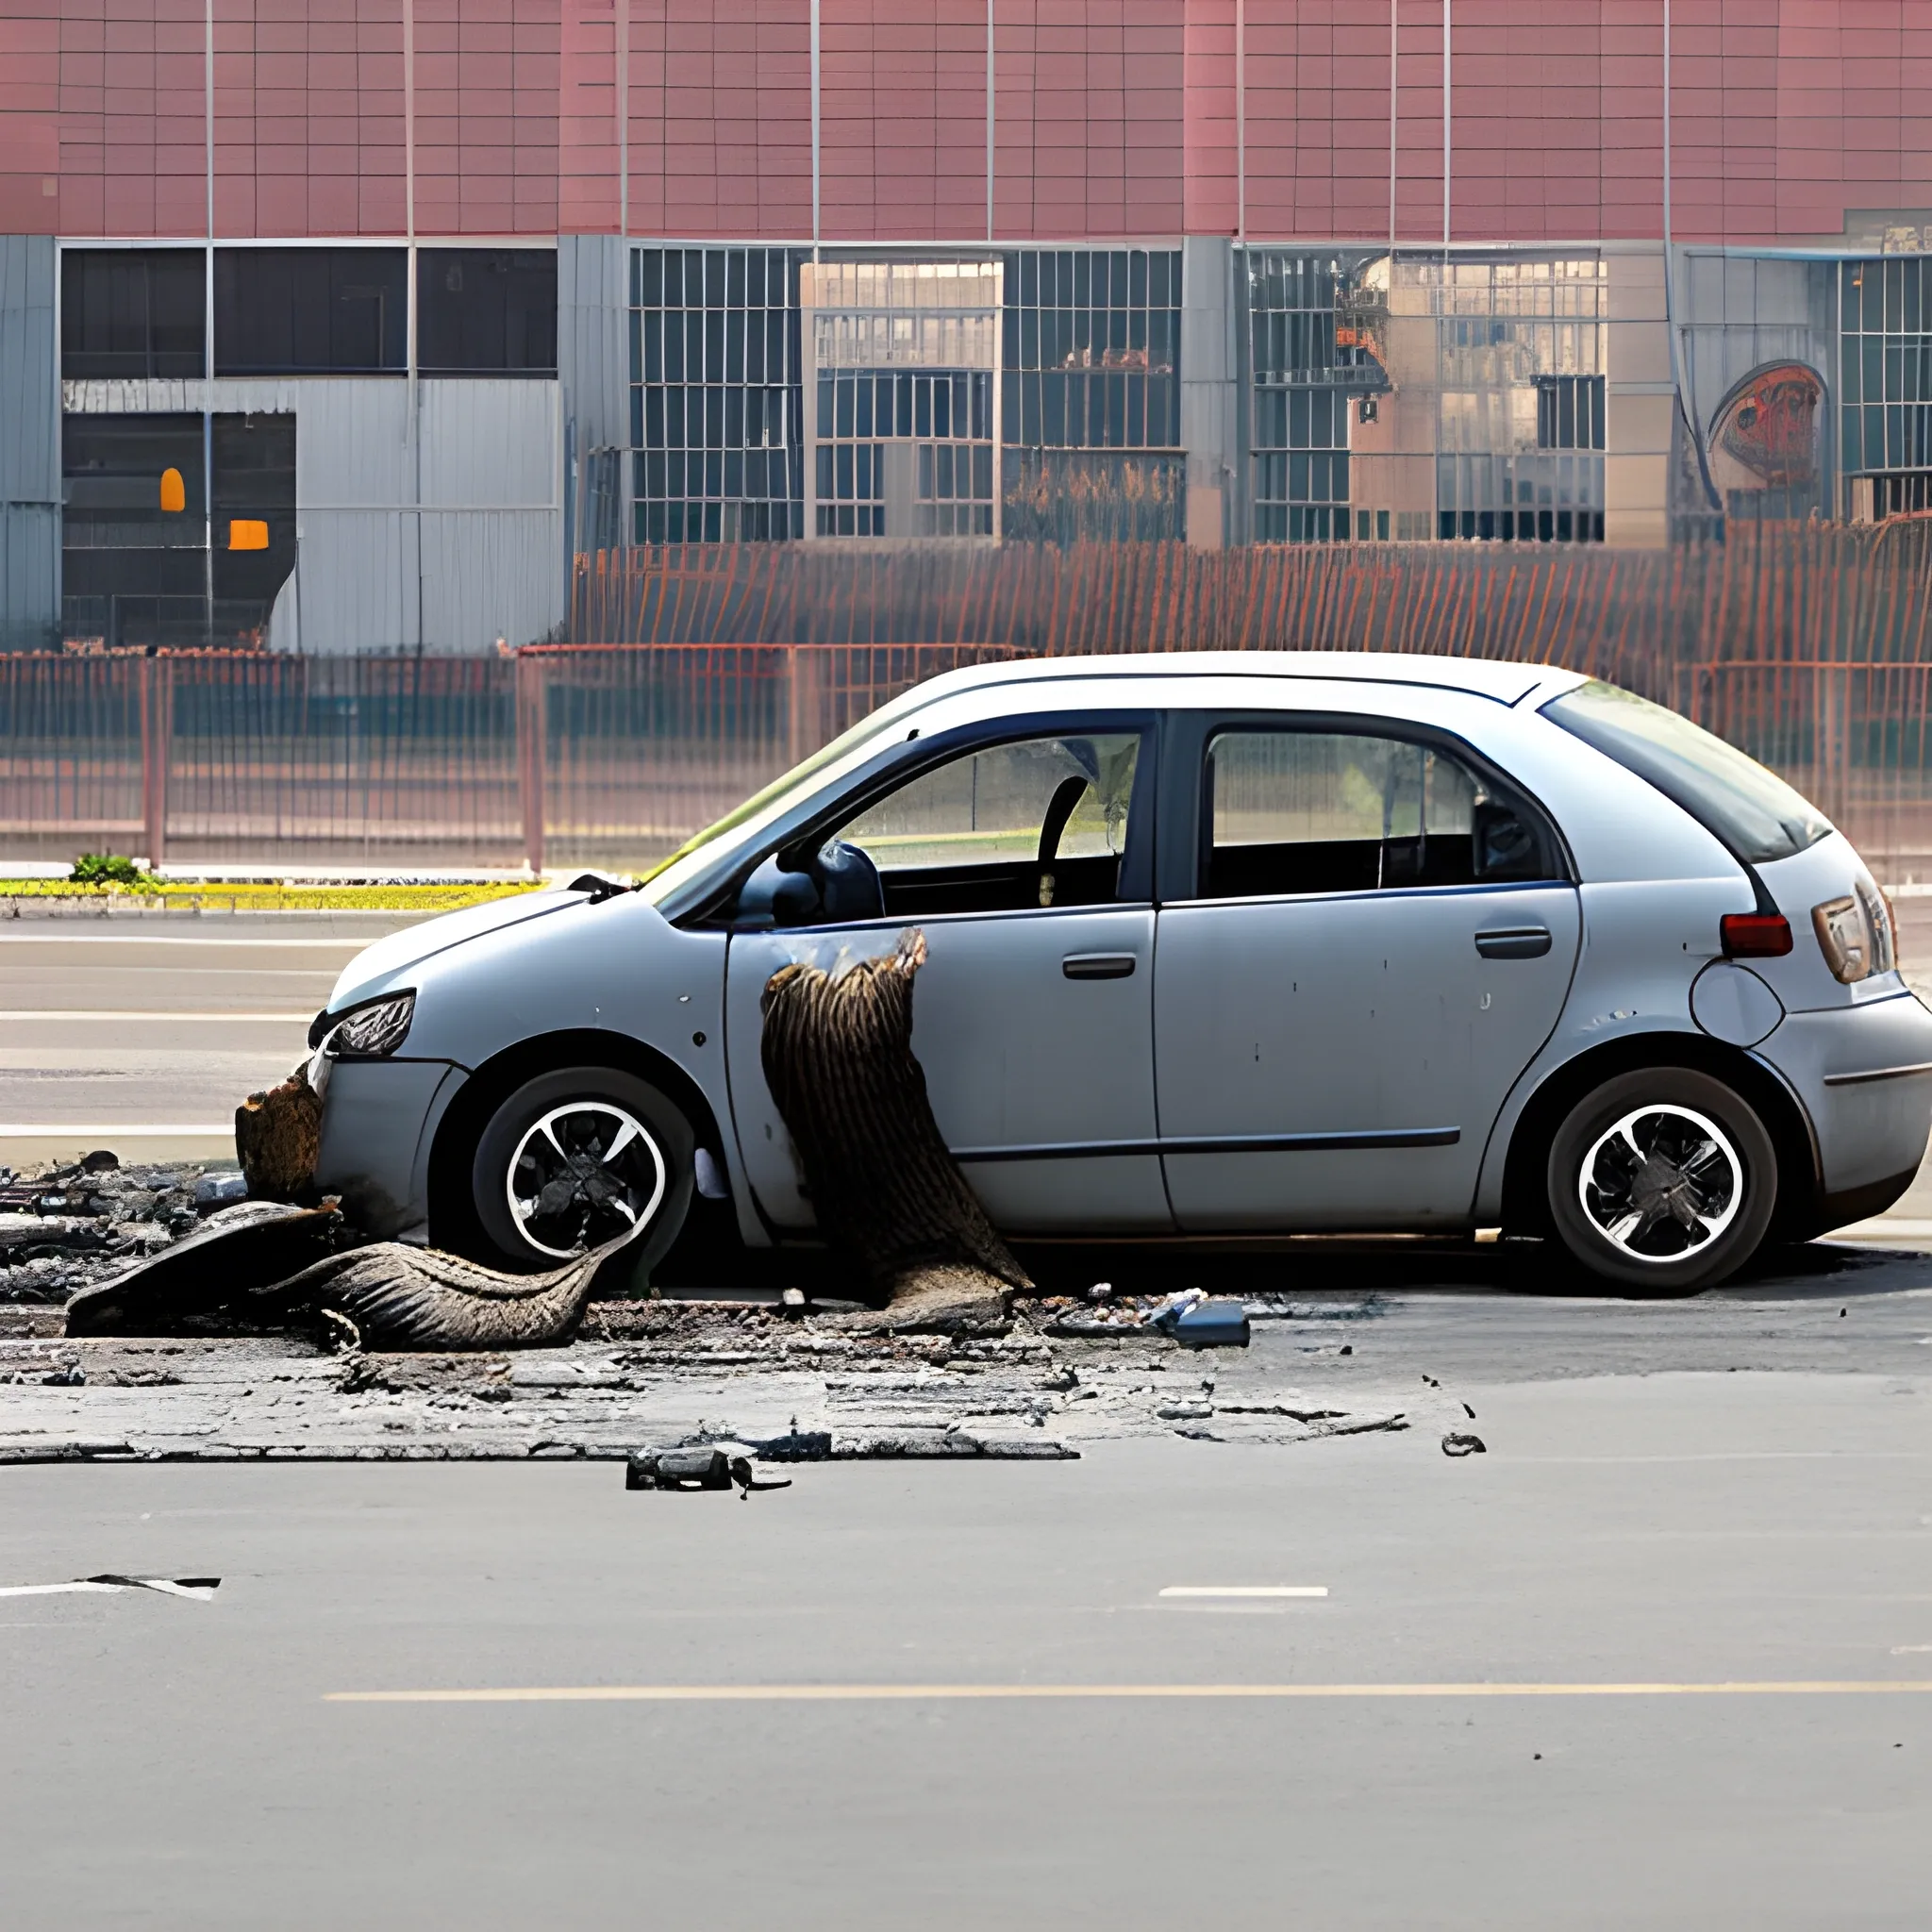 a large rabbit devours car parts in front of a factory, photograph